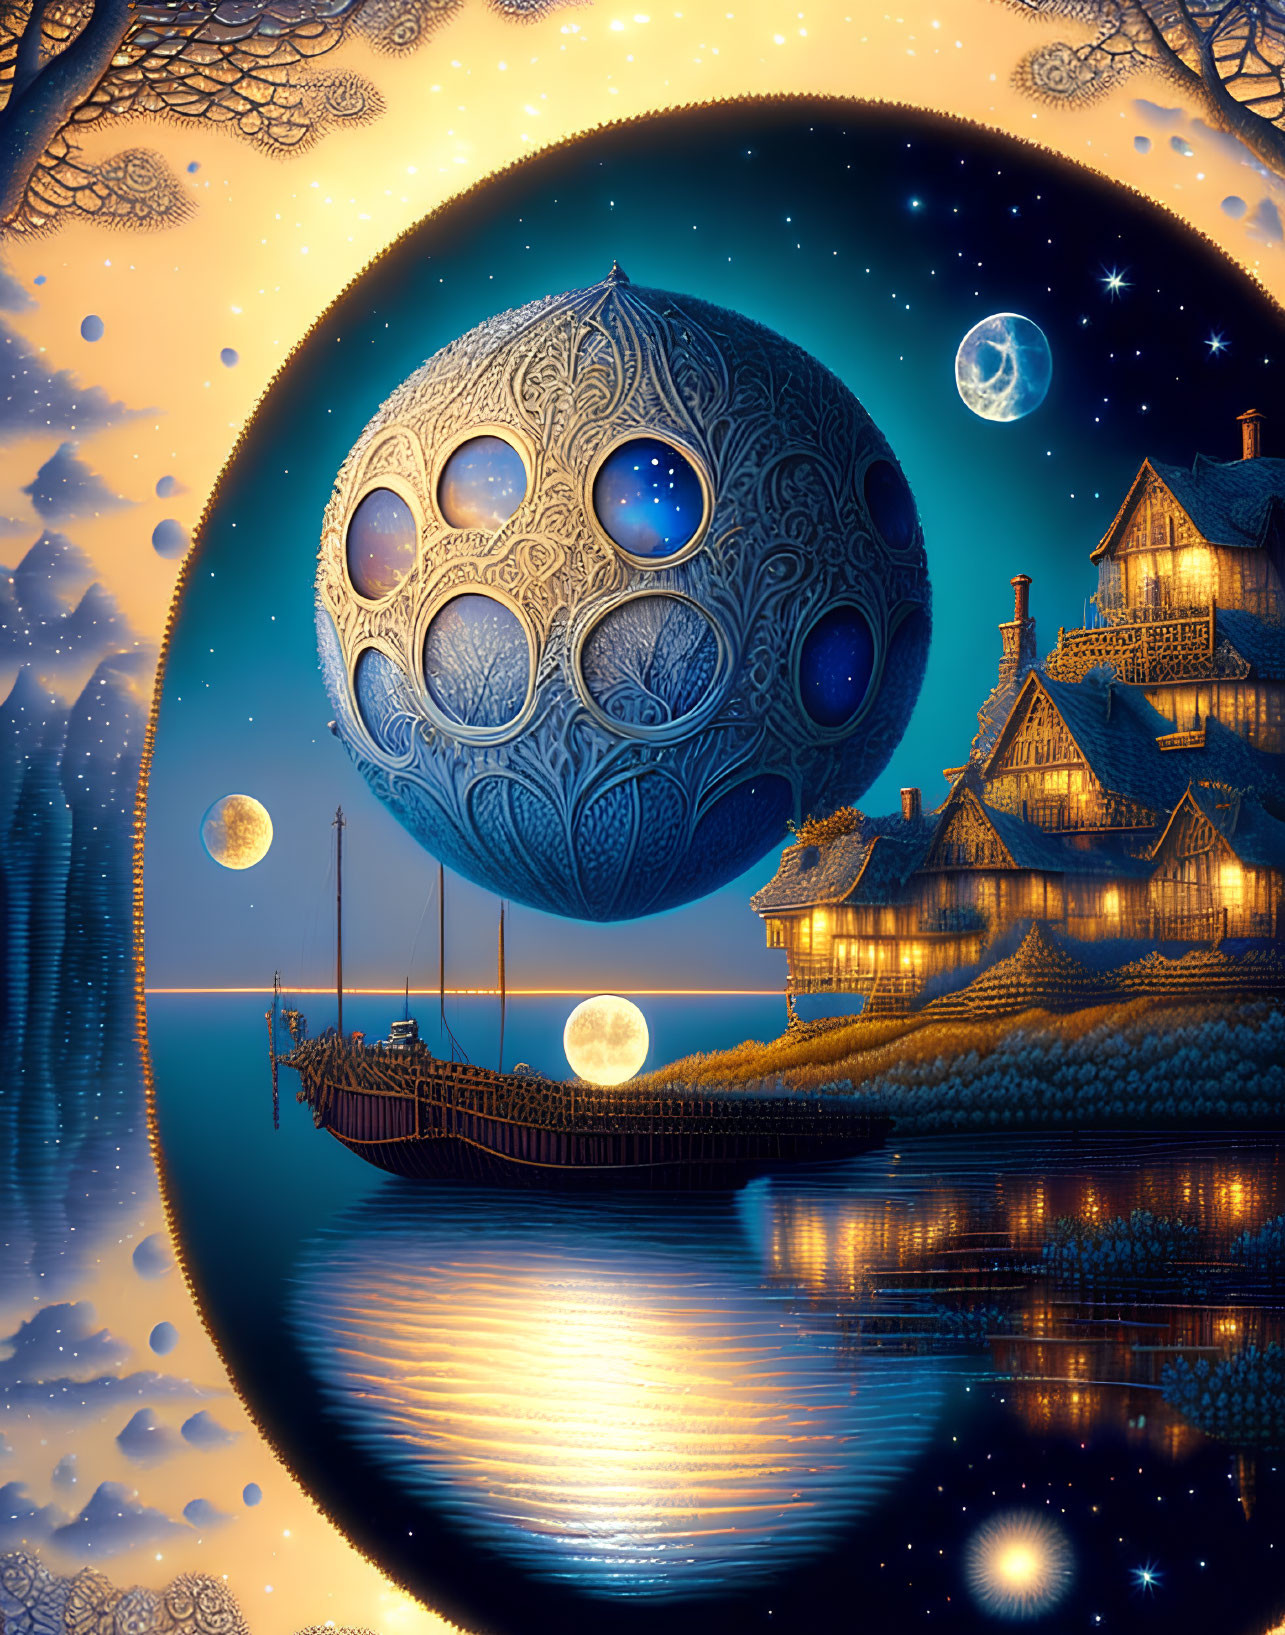 Fantastical night scene with ornate moon, ship, and houses in vibrant blue and gold hues